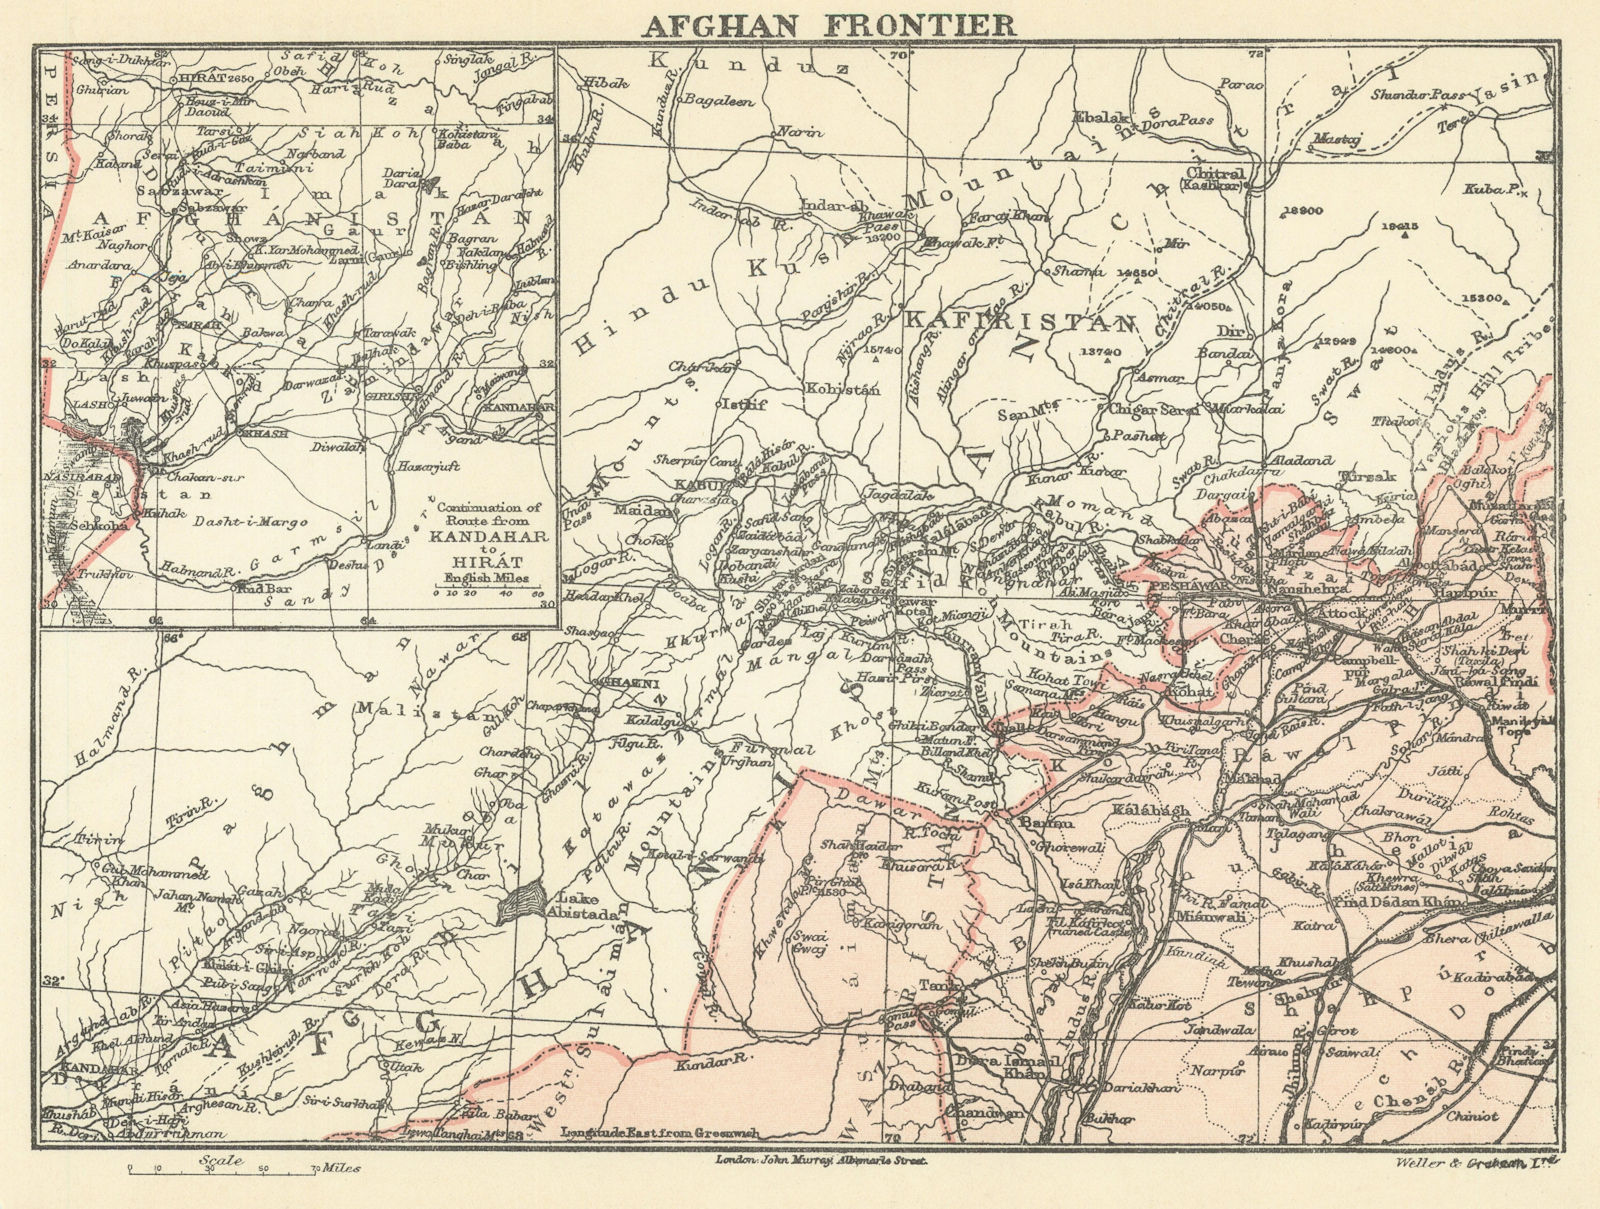 Associate Product PAKISTAN. Afghan Frontier. British India 1905 old antique map plan chart